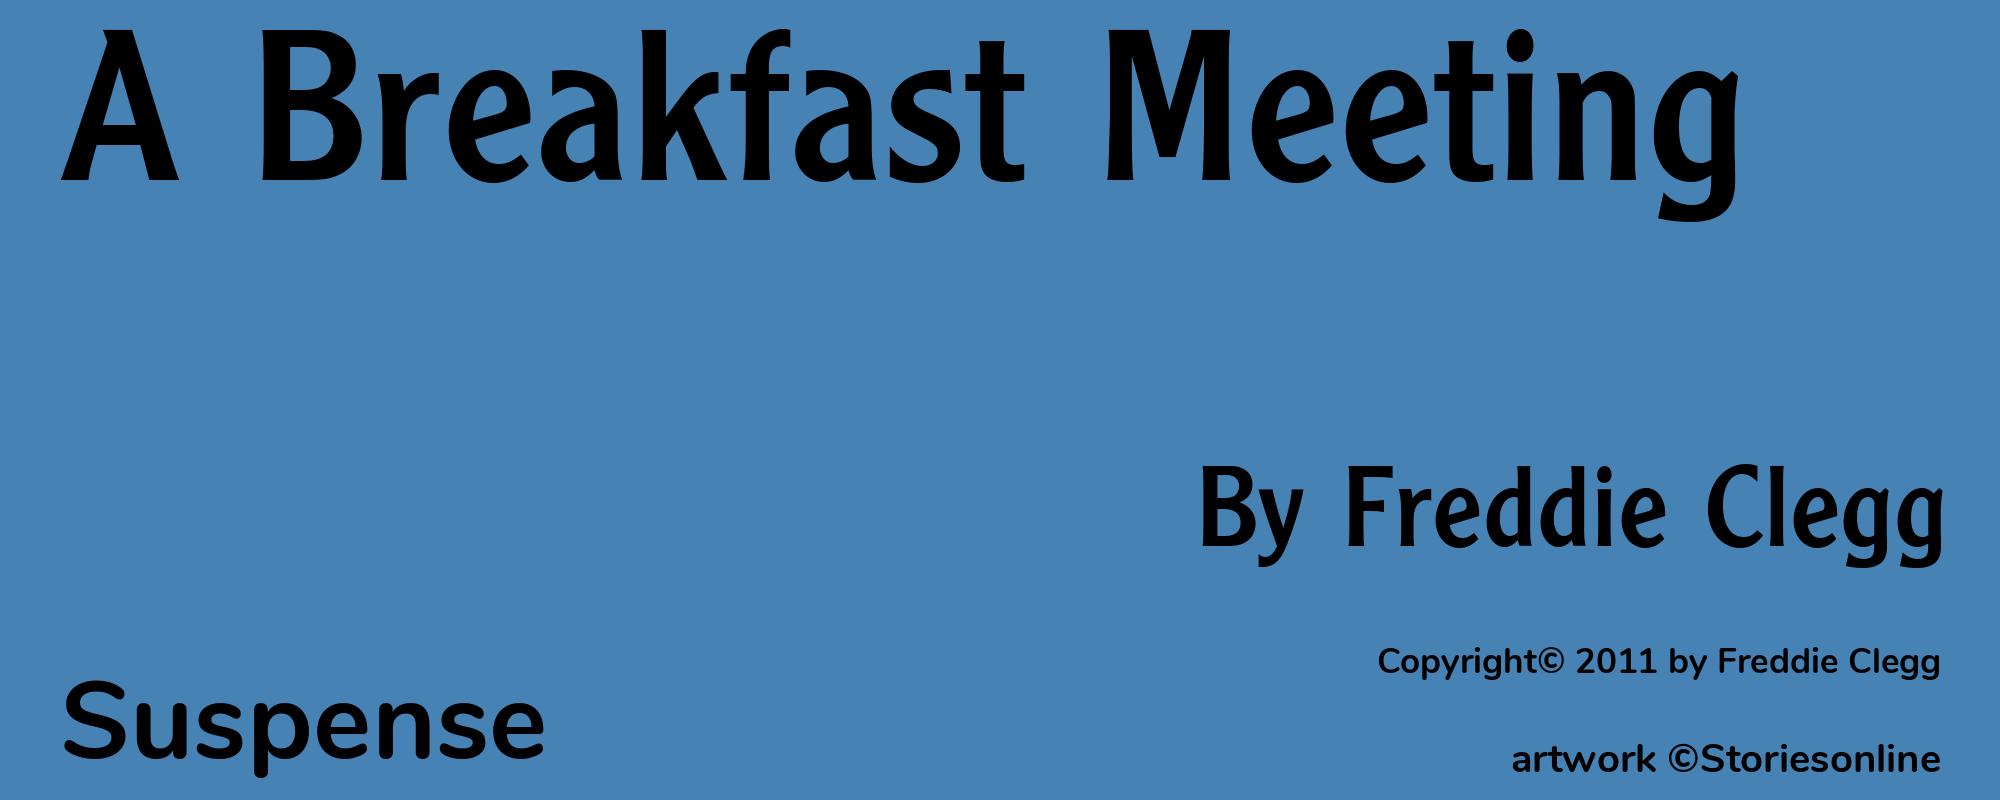 A Breakfast Meeting - Cover